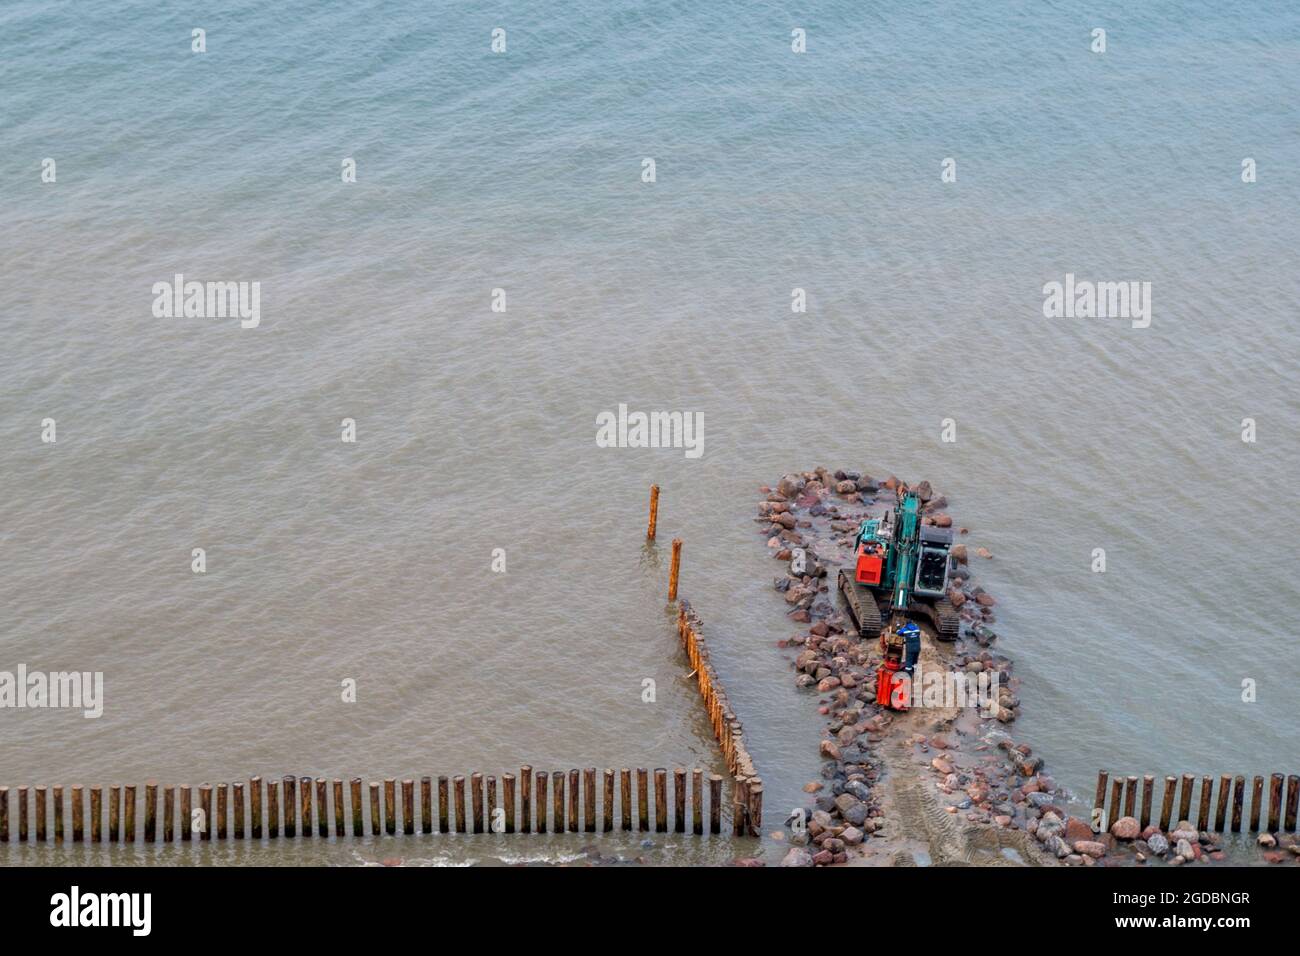 Blue excavator with red working part, standing on base of large stones is involved in formation of wooden breakwater from piles protect shore on backg Stock Photo